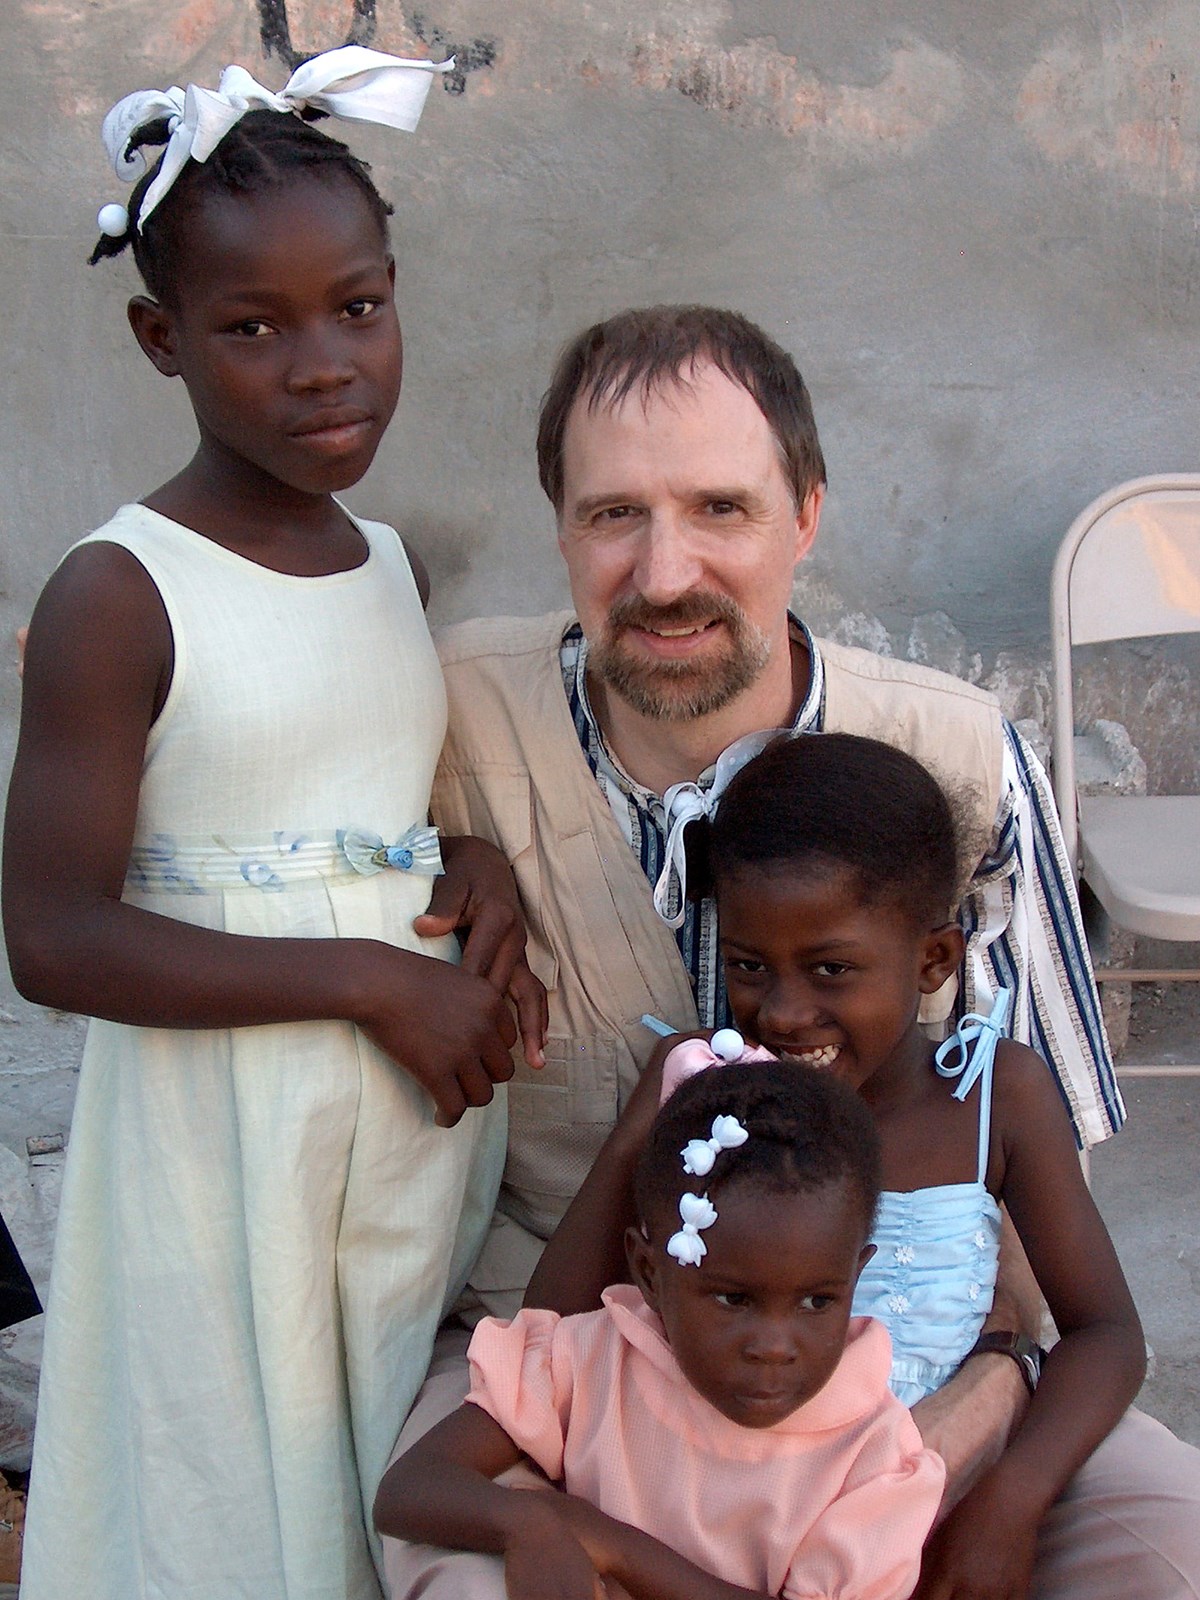 UMass Lowell Professor and Director of the Haiti Development Studies Center poses with three young Haitian girls.